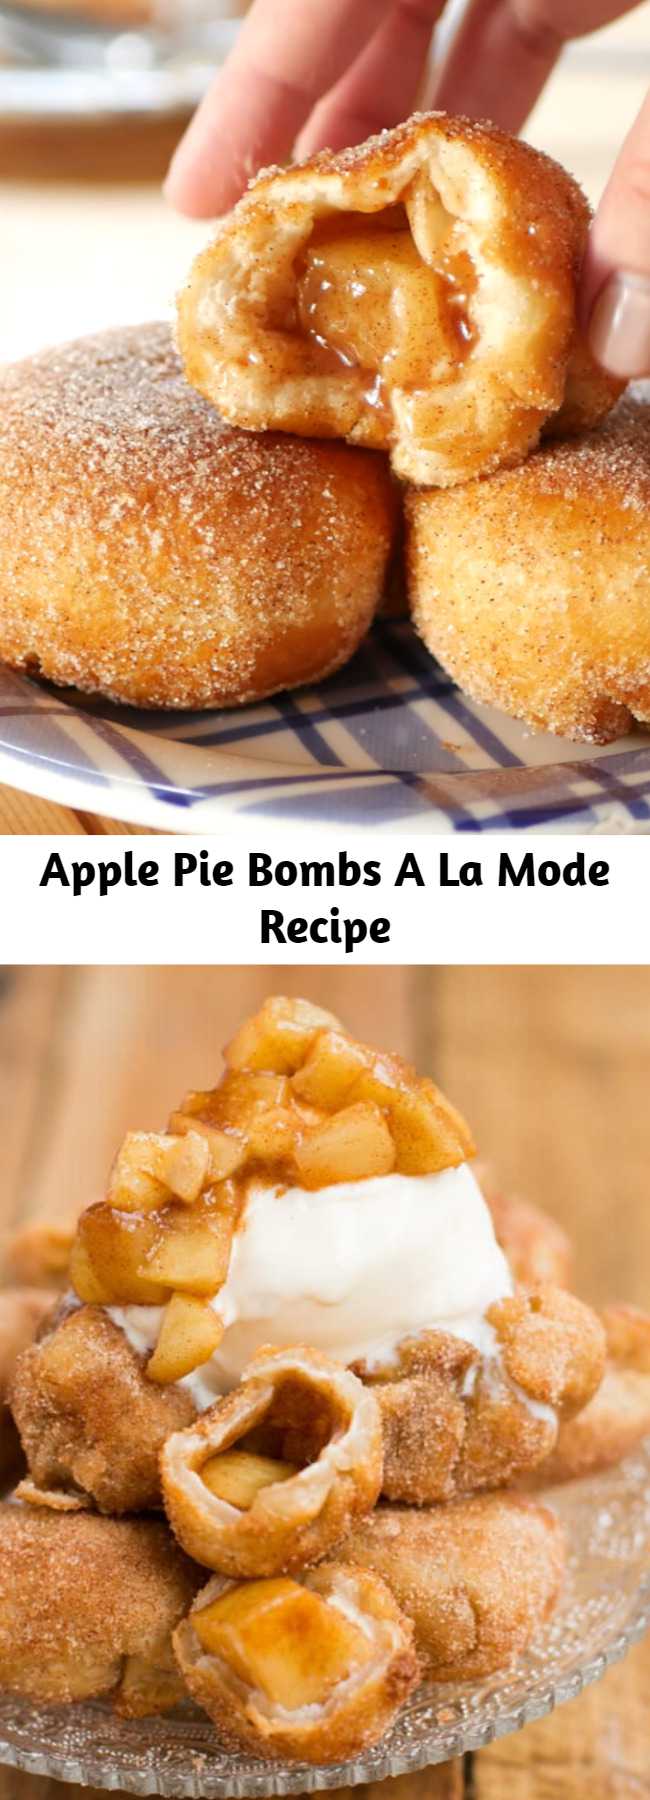 Apple Pie Bombs A La Mode Recipe - It's not fall until you've made apple pie bombs a la mode with creamy vanilla ice cream and those glazed apples all over the tops. I love fall dessert recipes!